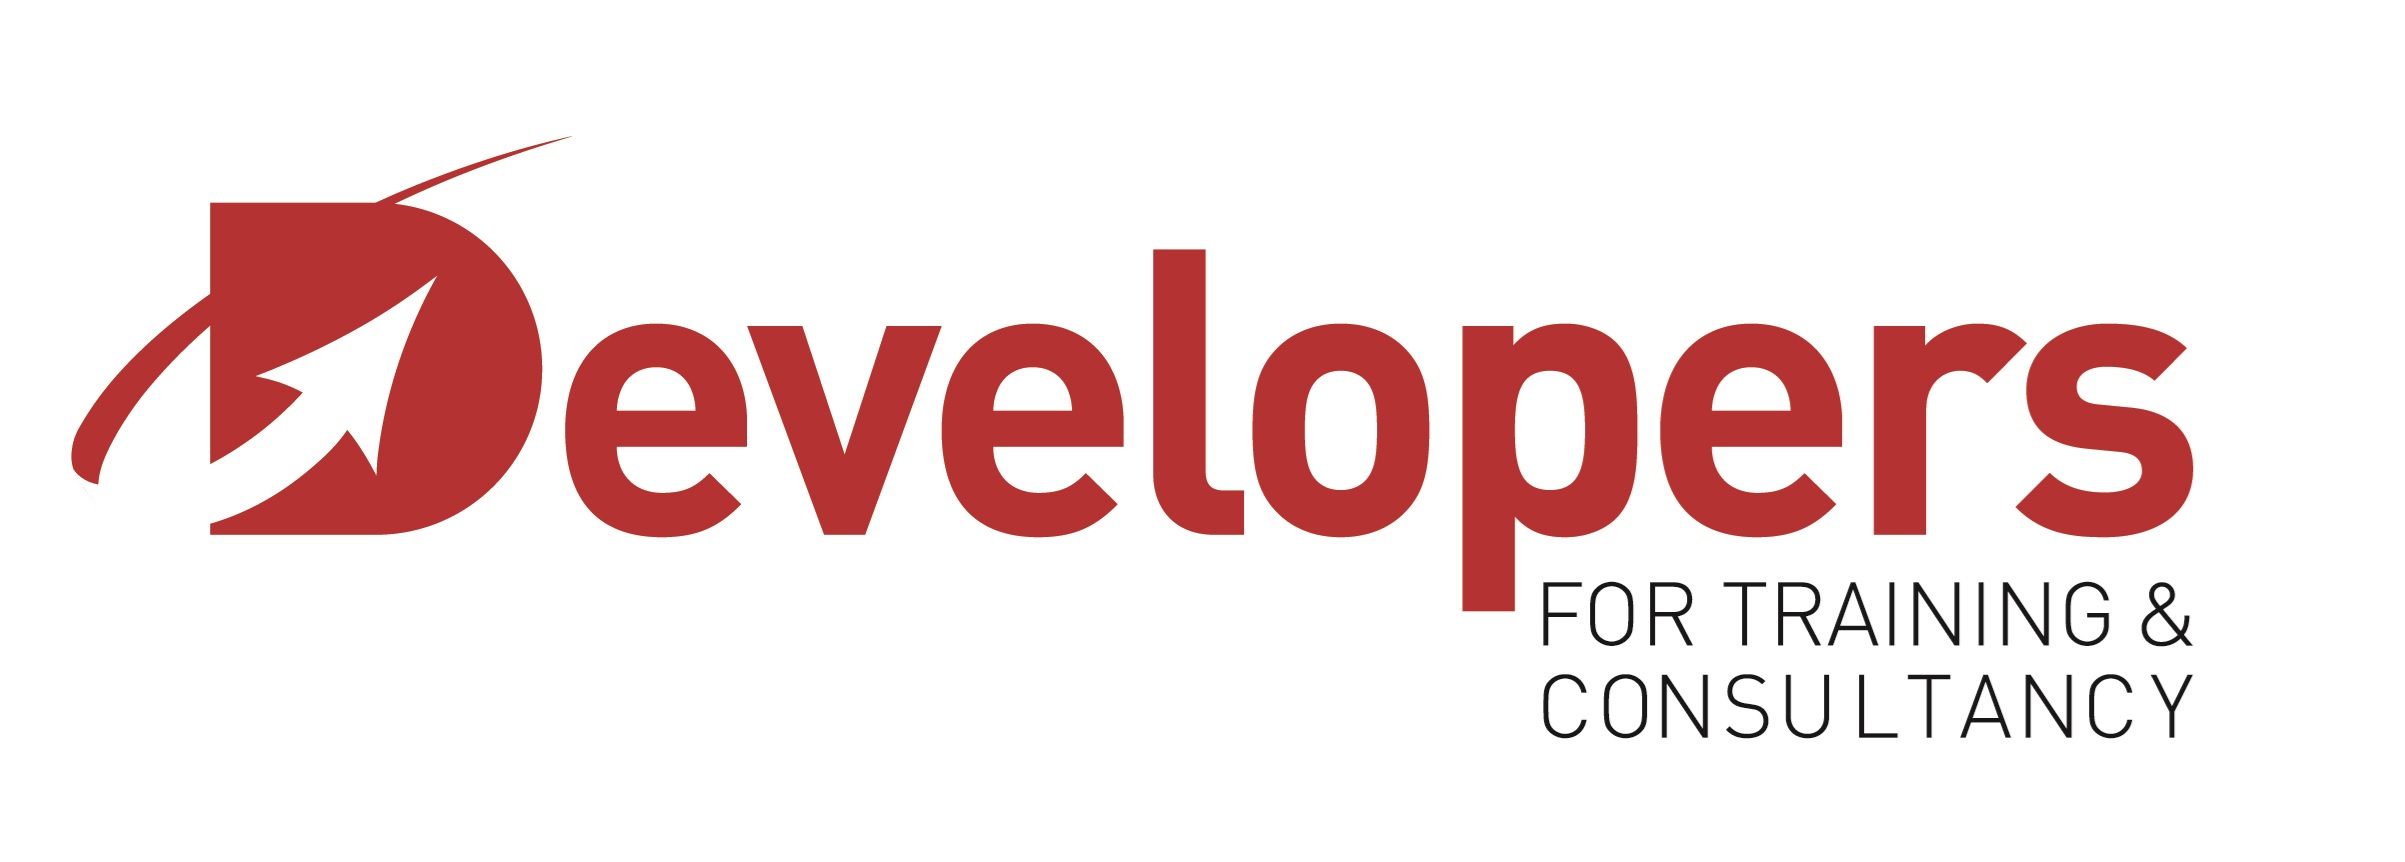 More about Developers for Training and Consultancy 